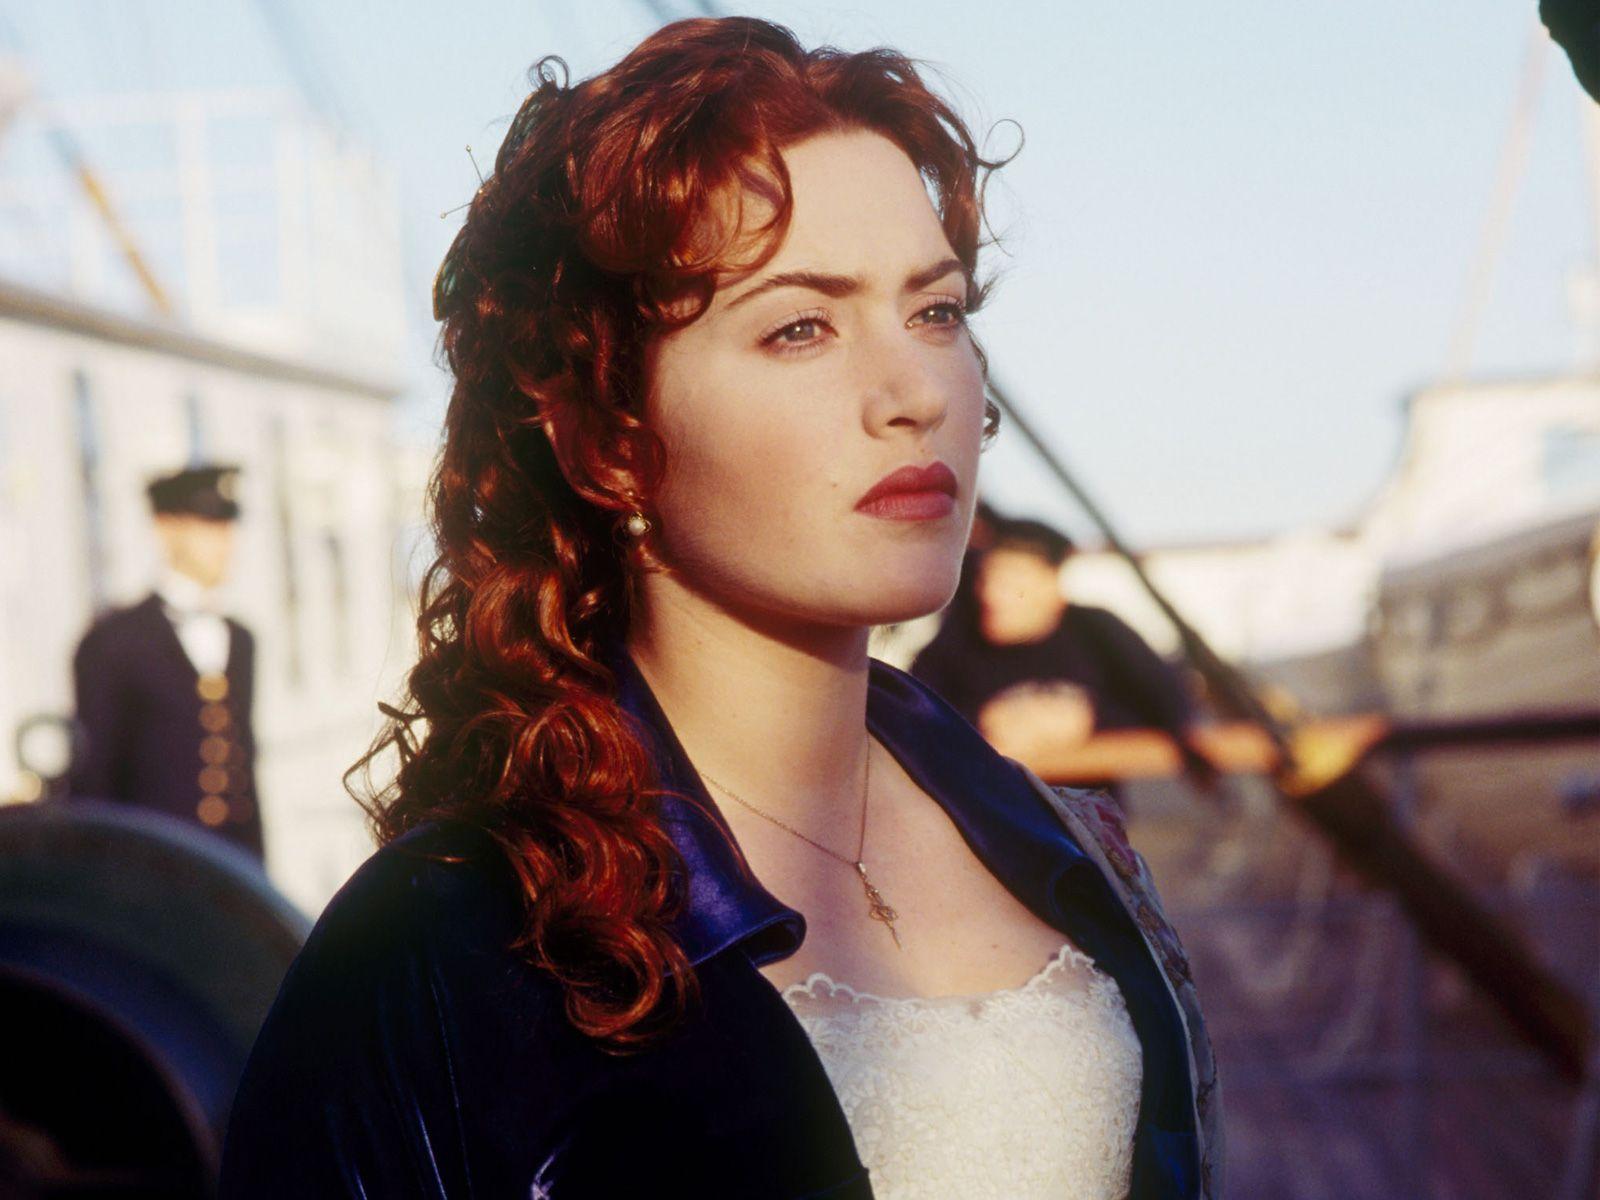 Kate Winslet HD Image, Get Free top quality Kate Winslet HD